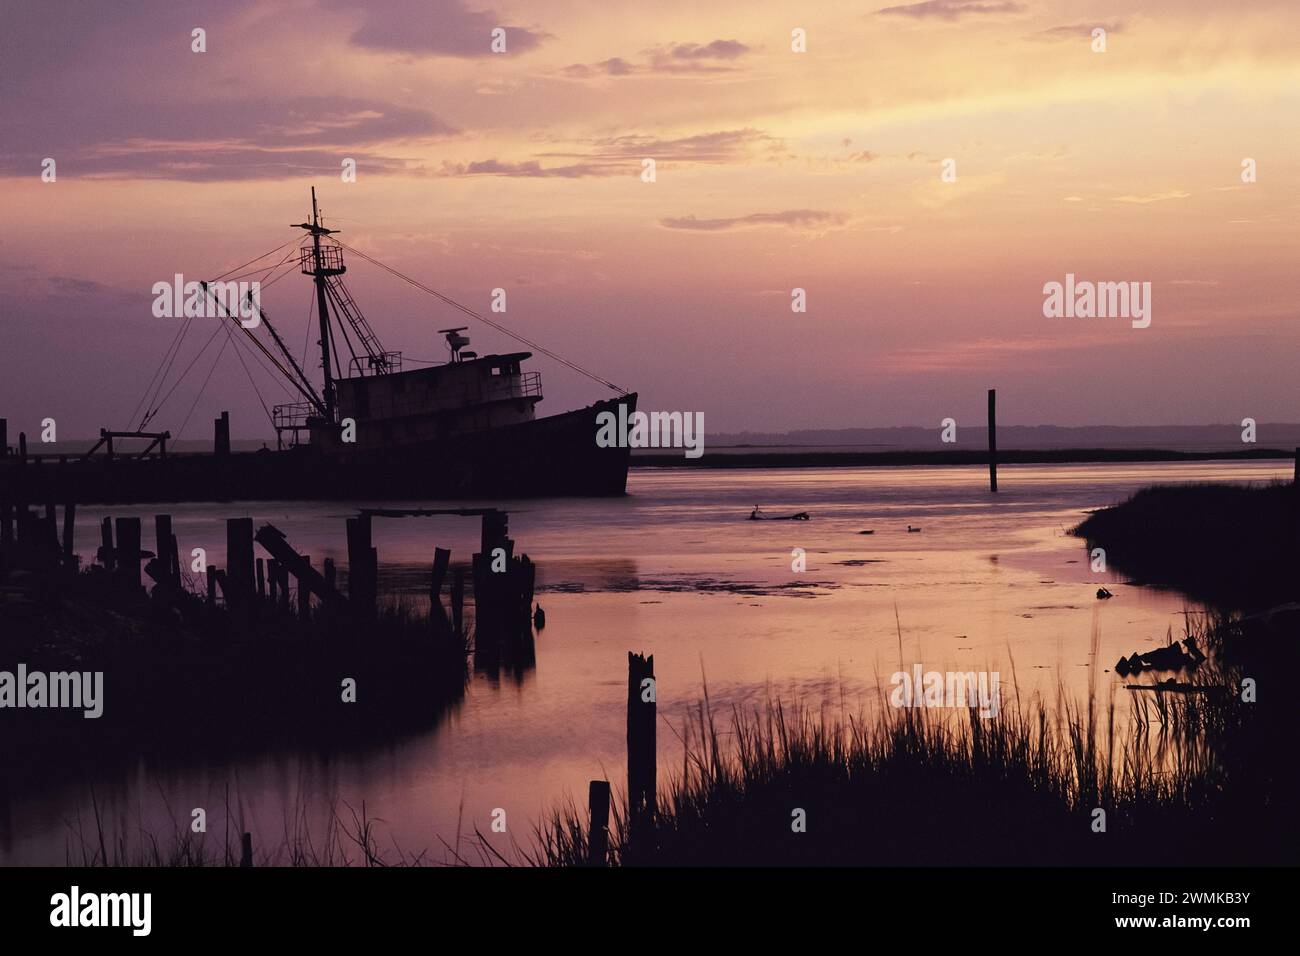 Fishing boat silhouetted at twilight; United States of America Stock Photo